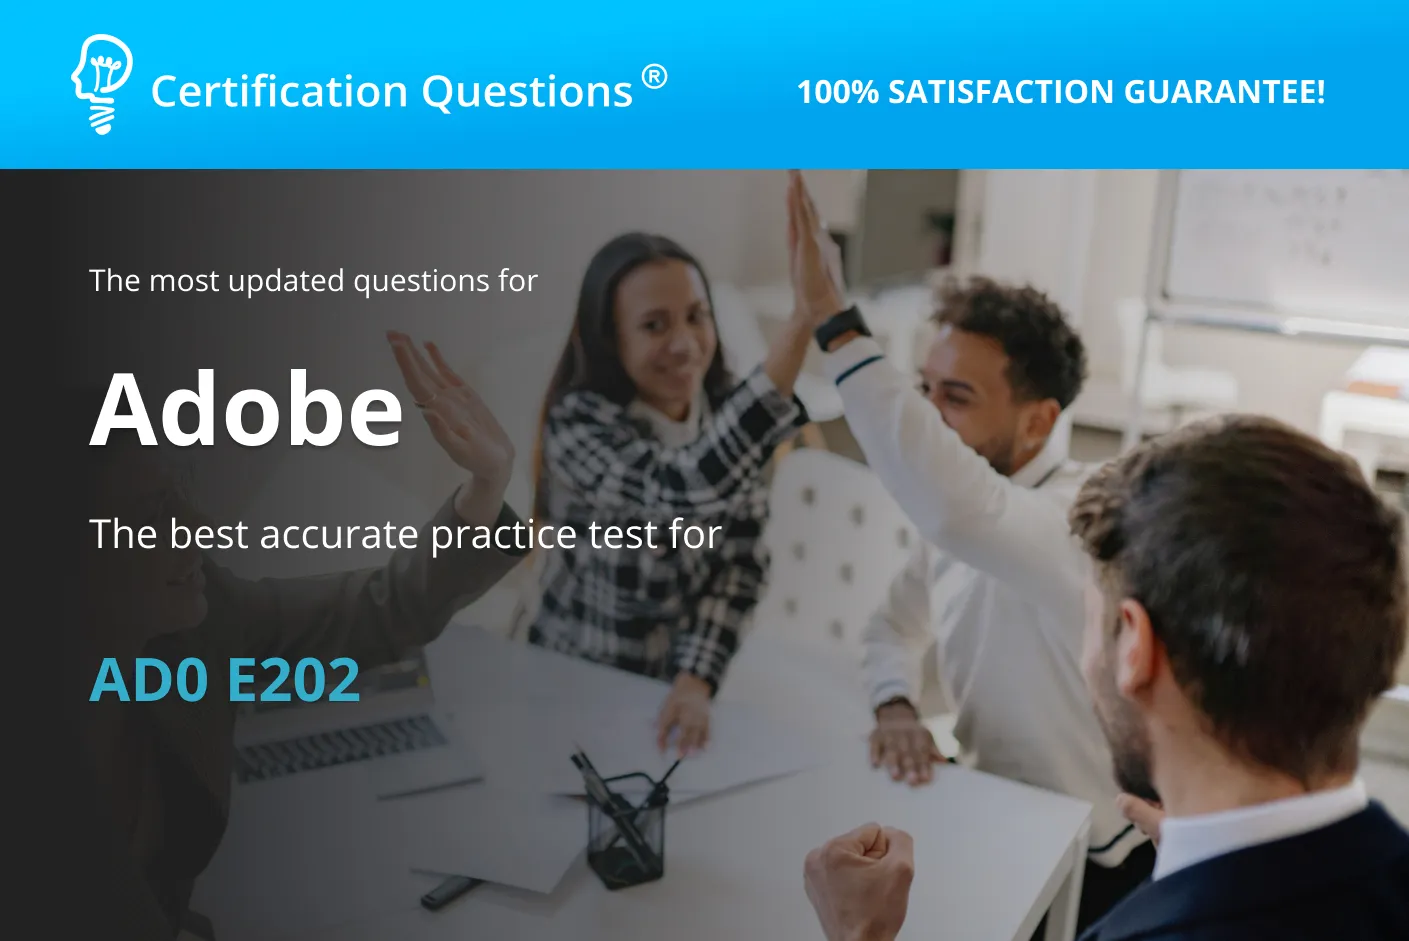 Here is the image for the adobe analytics business practitioner exam questions in the USA.